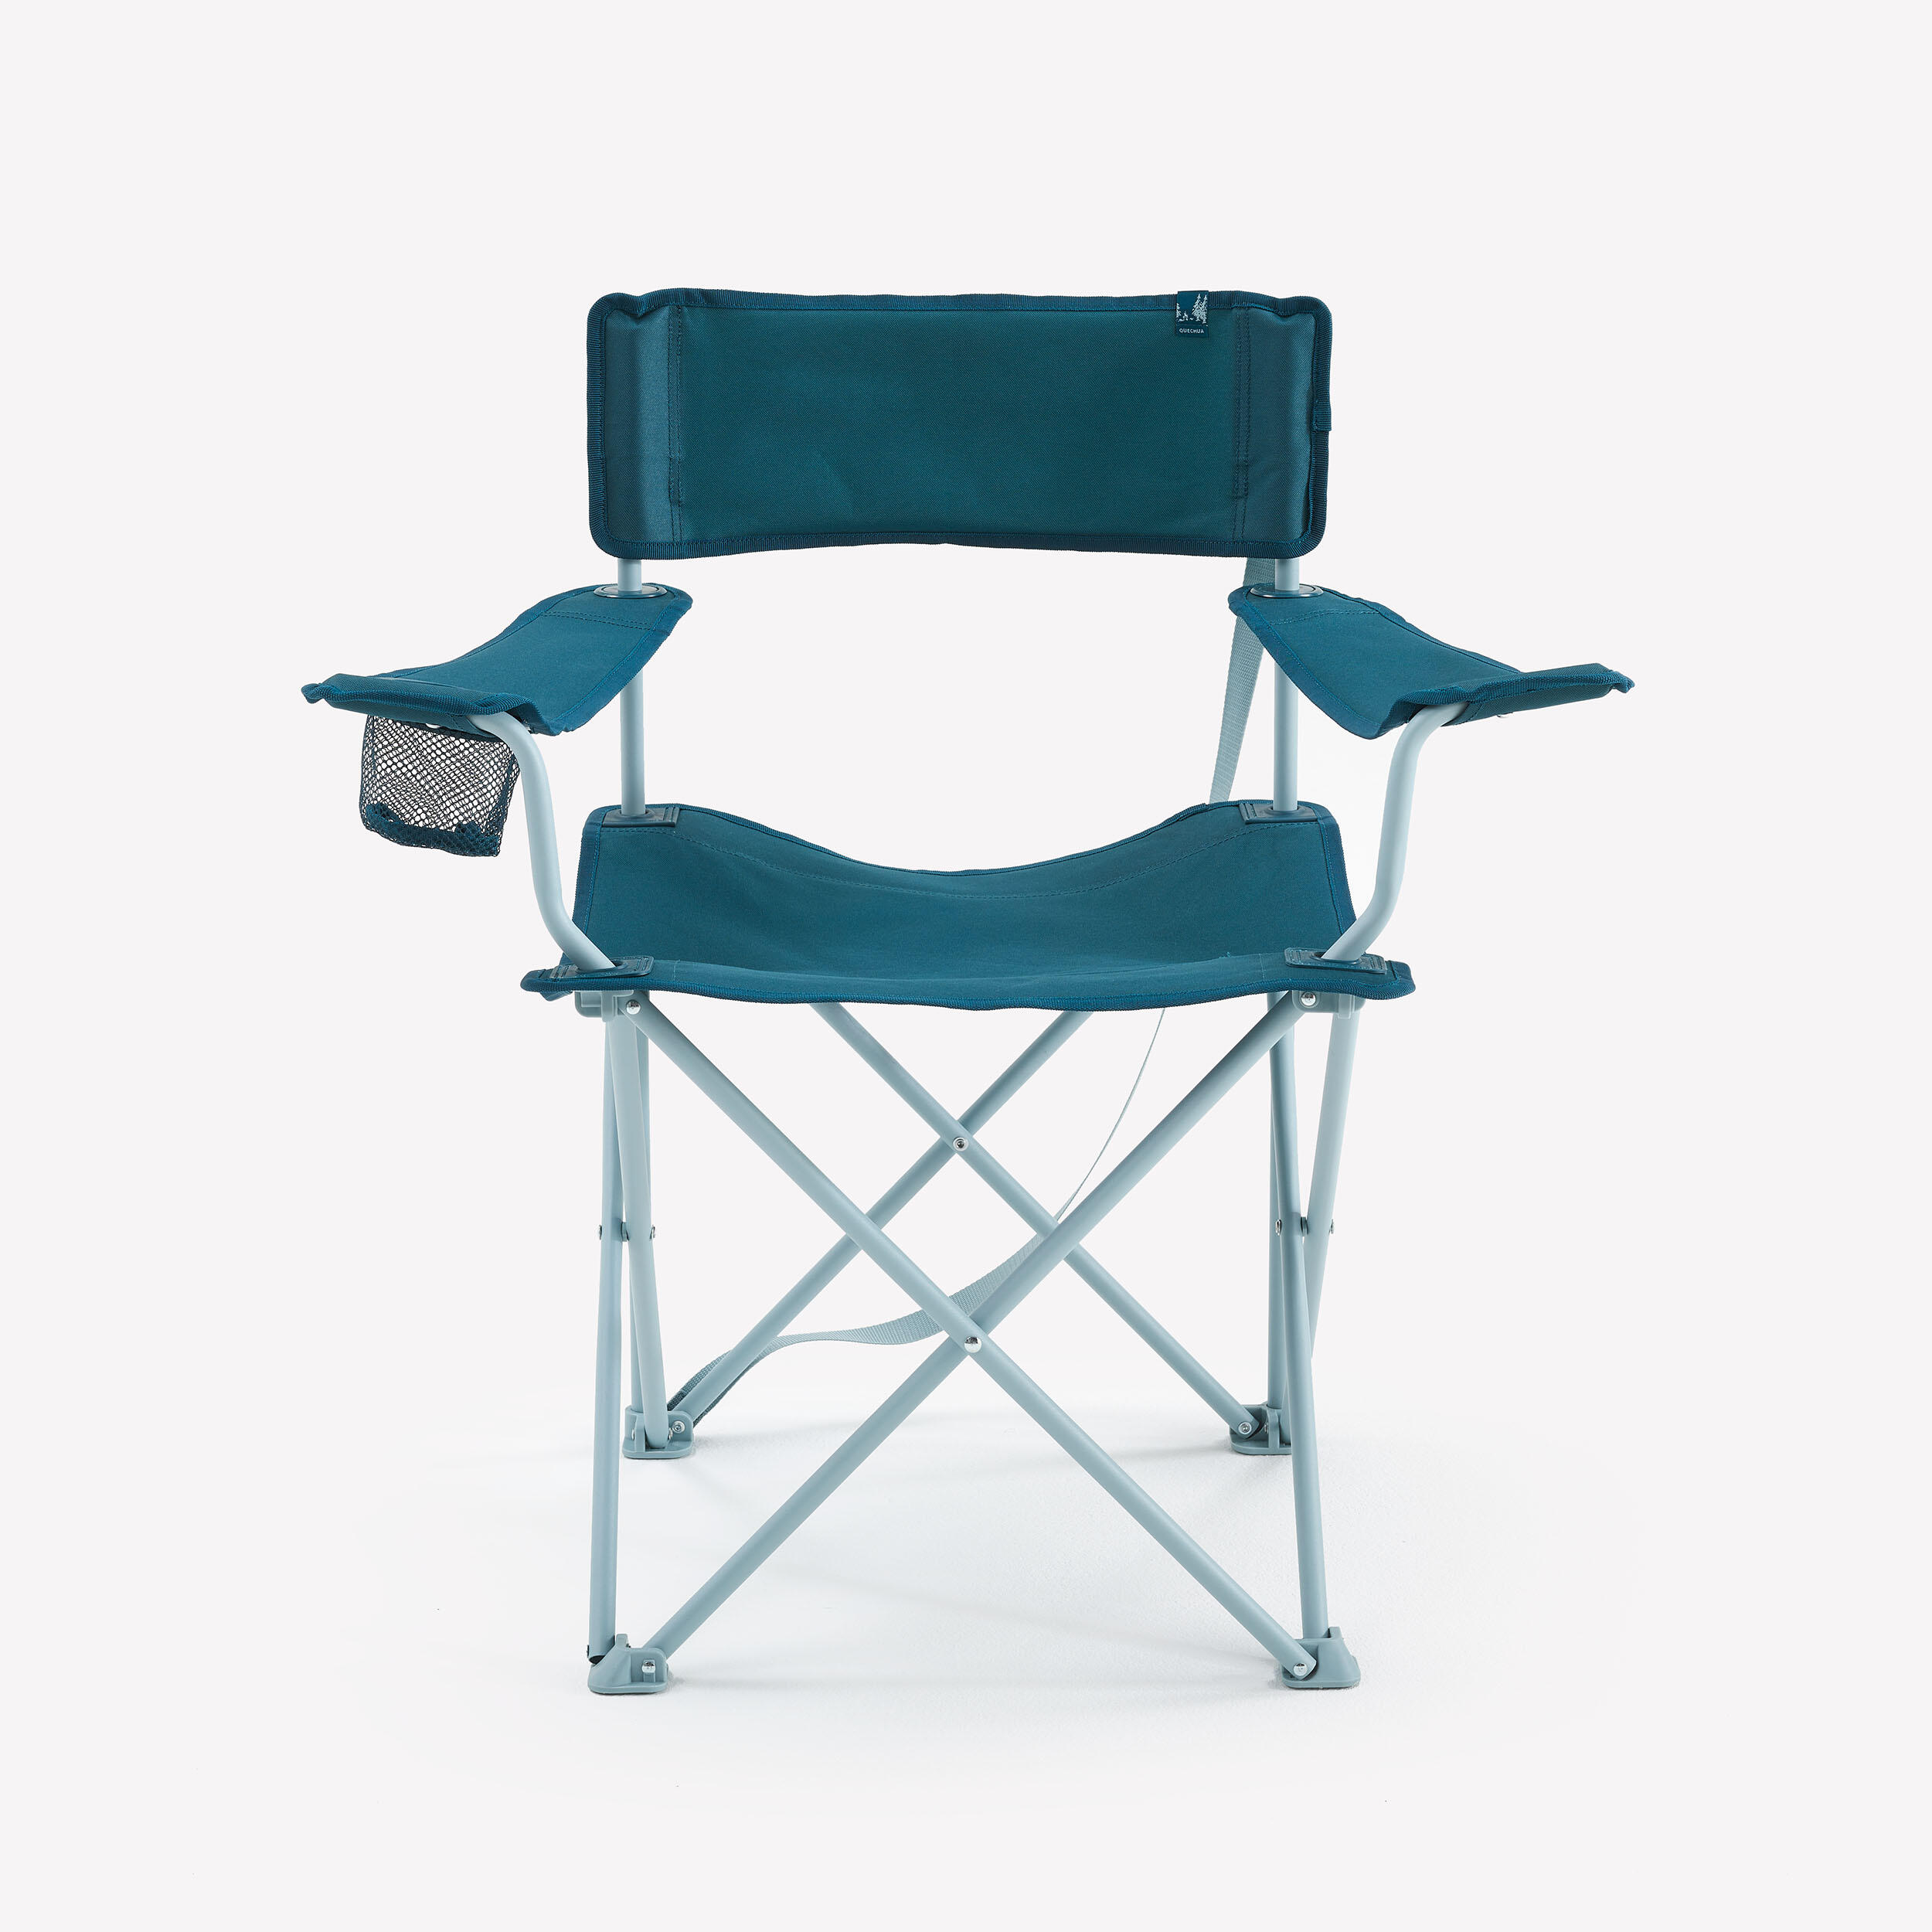 FOLDING CAMPING CHAIR 7/7